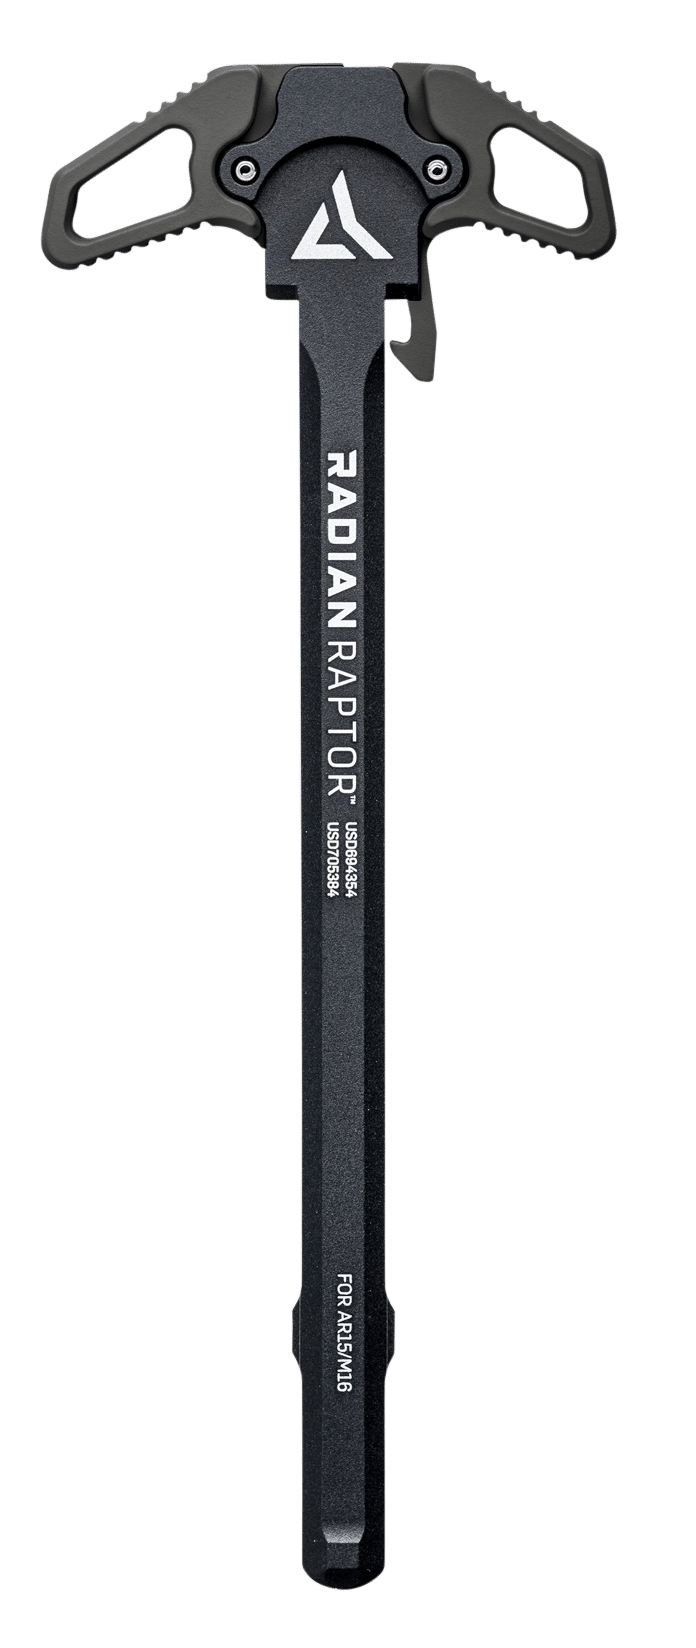 Radian Weapons, Raptor, Charging Handle, Anodized Finish, Fits AR-15, Gray (R0560)